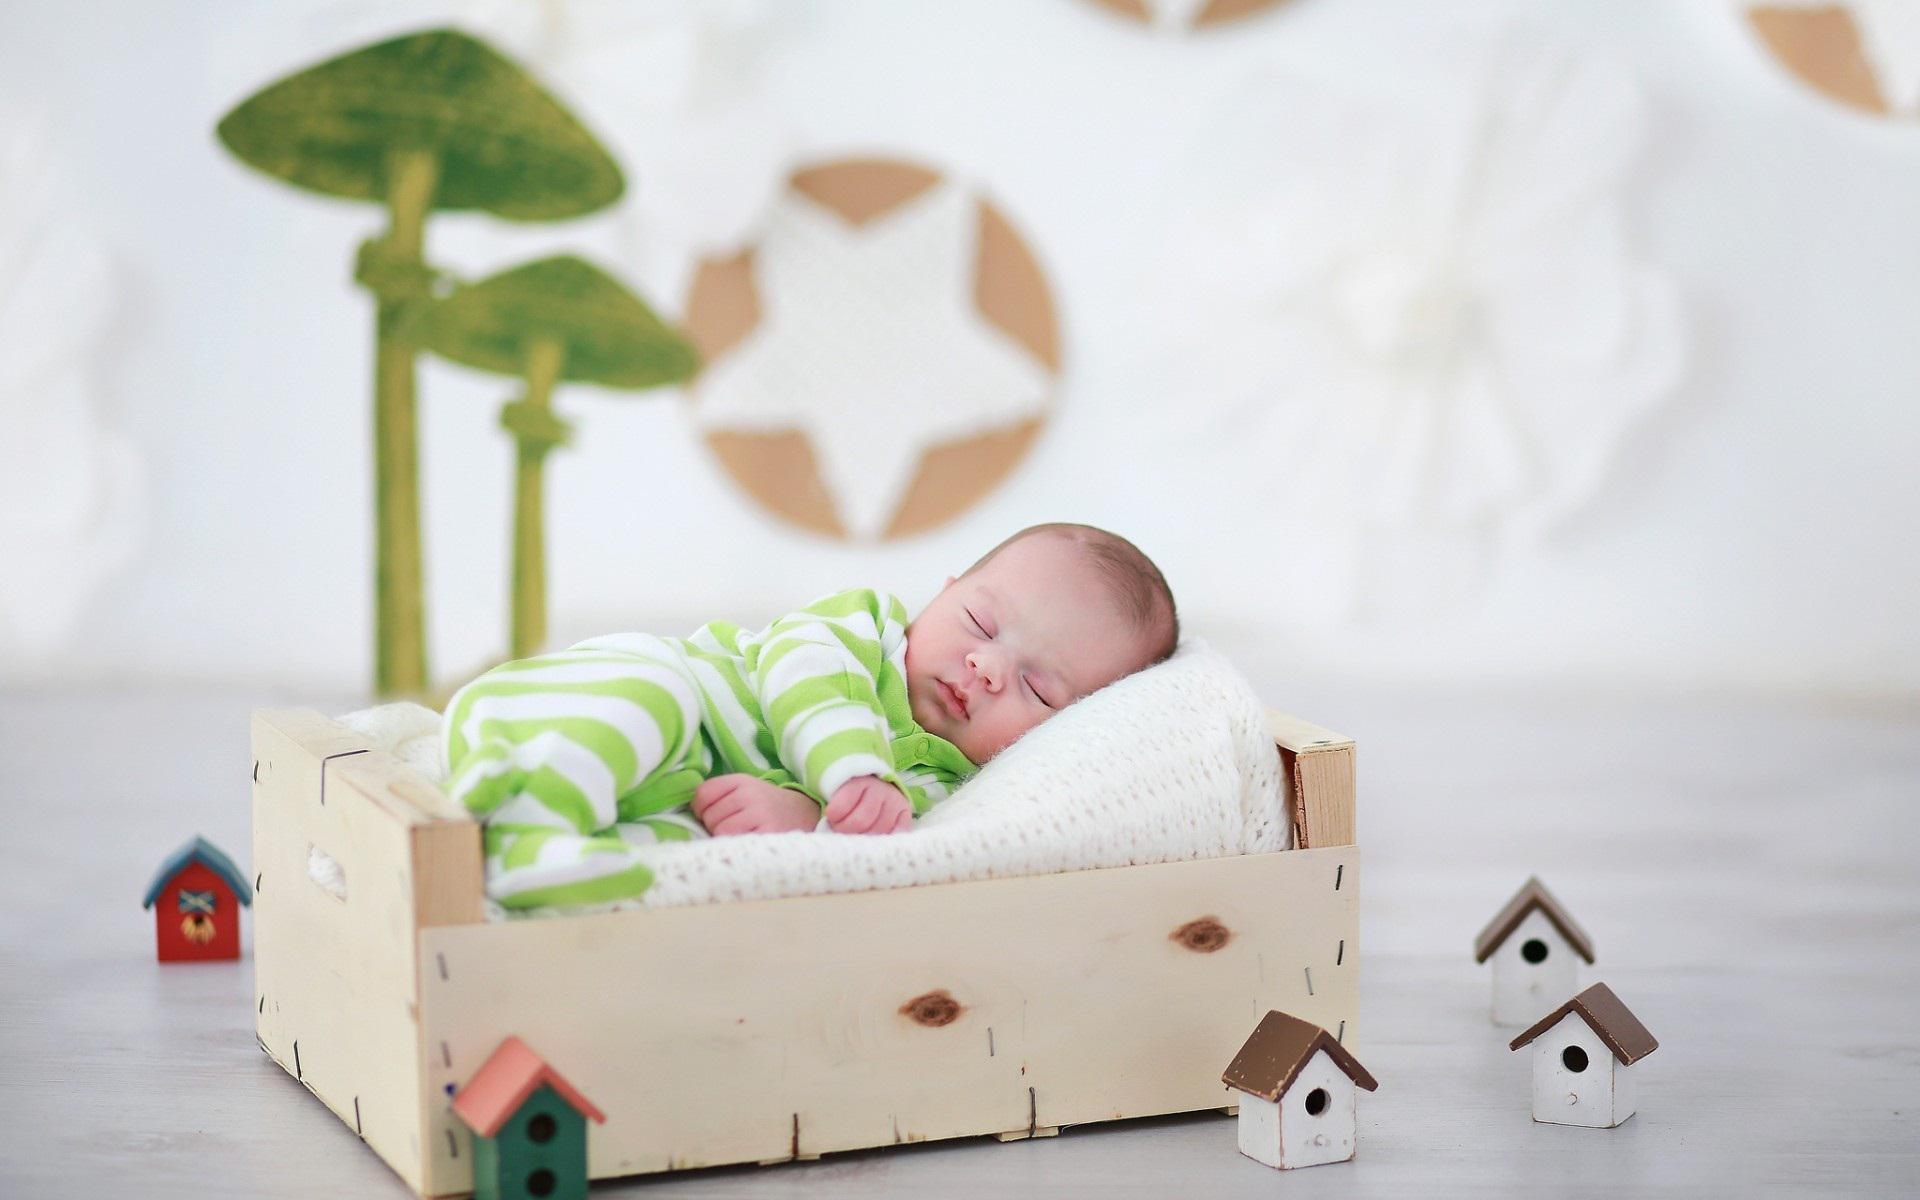 Beautiful Baby Sleeping With Home - Baby Sleeping At Home - HD Wallpaper 